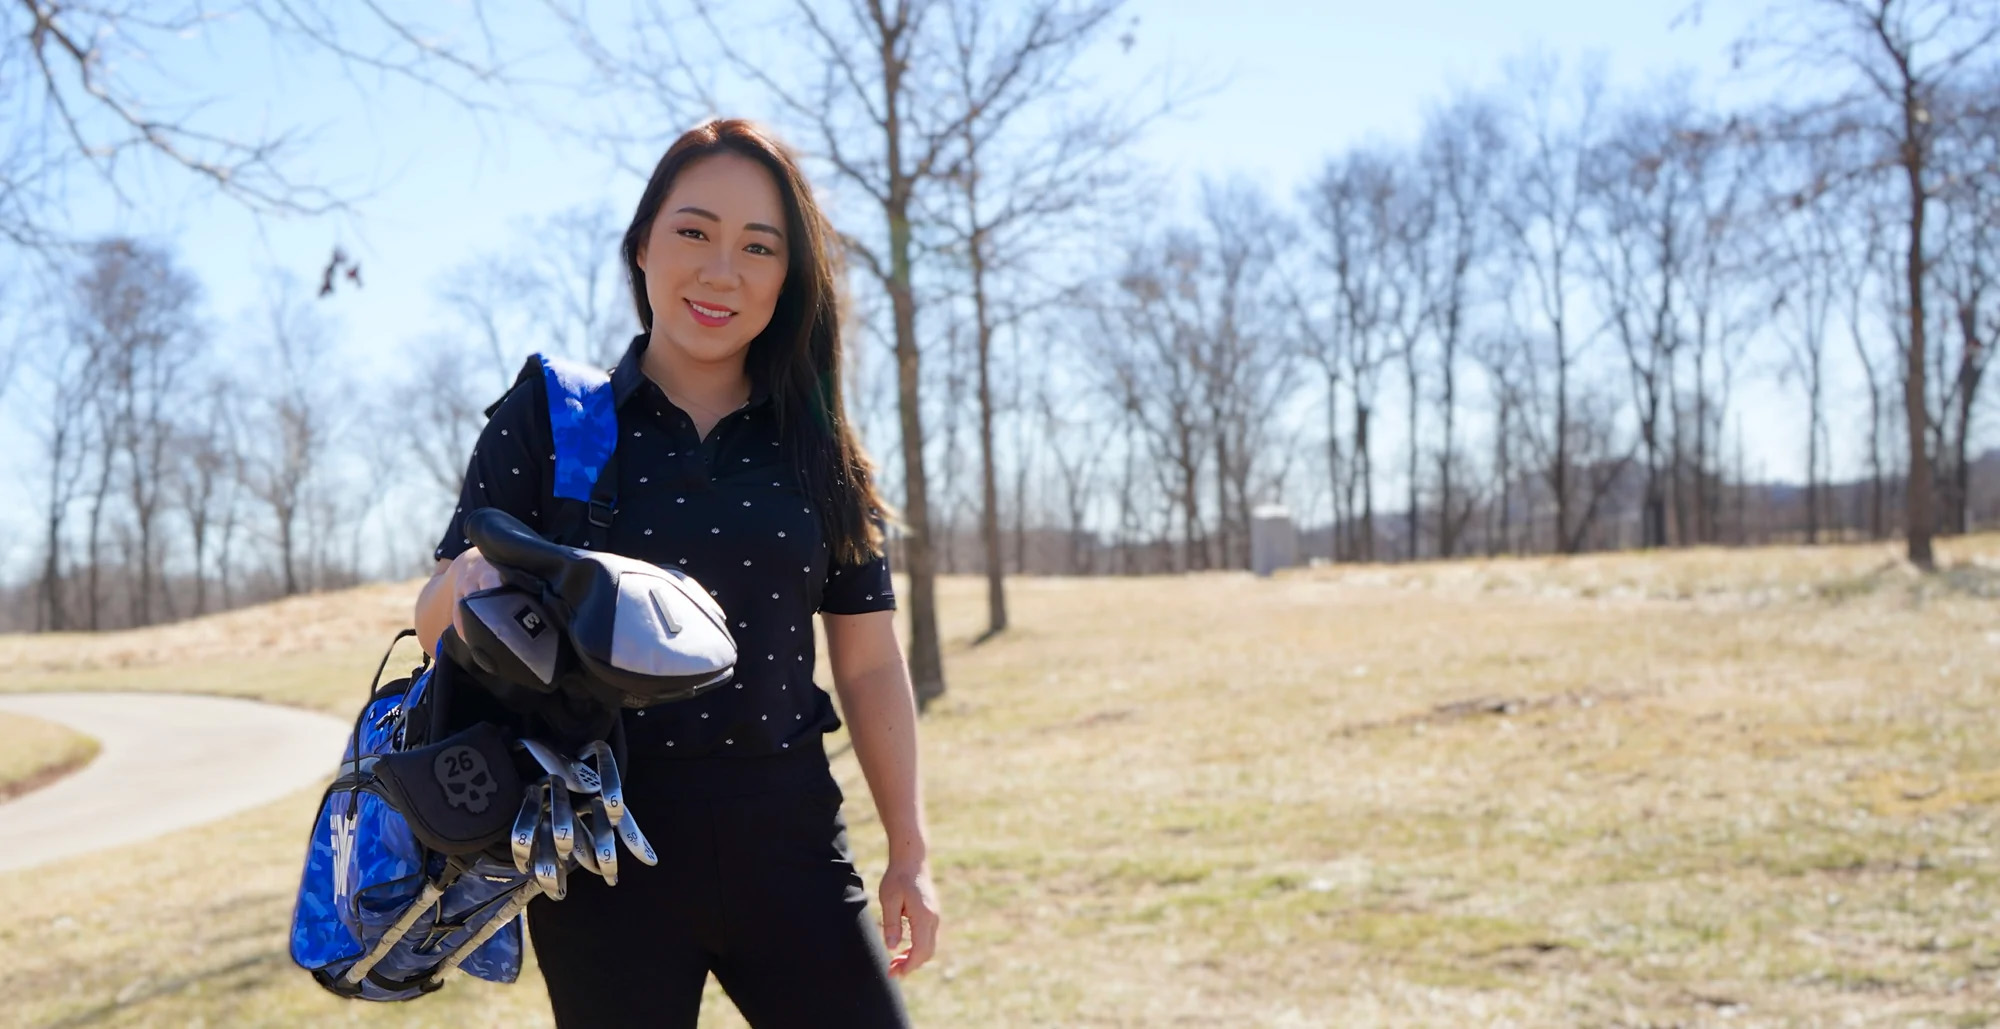 Cathy Kim stands on a golf course, a golf bag and clubs over her shoulder